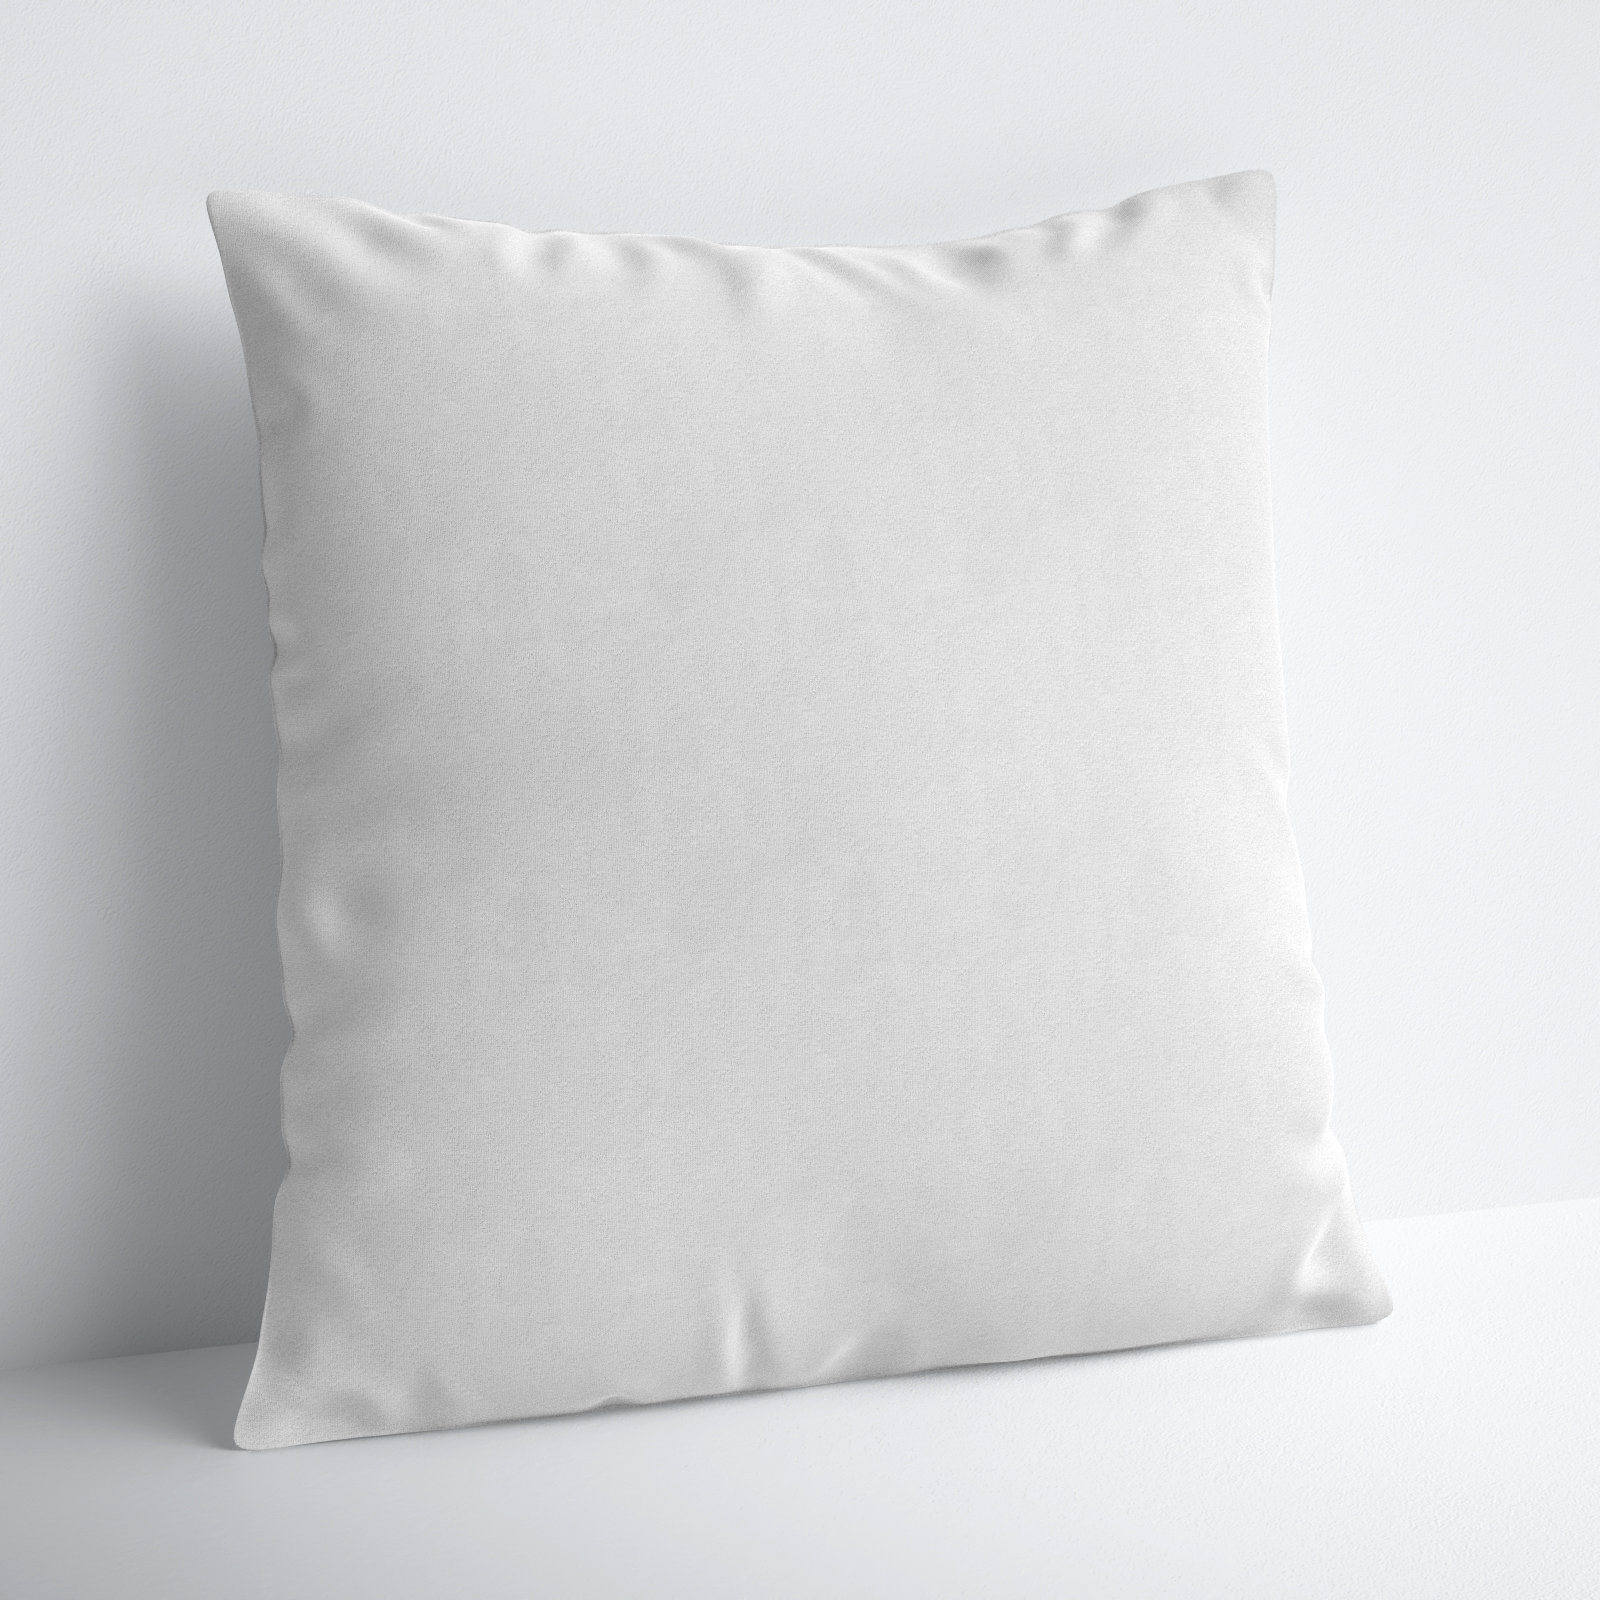 Pillow Inserts - all shapes and sizes